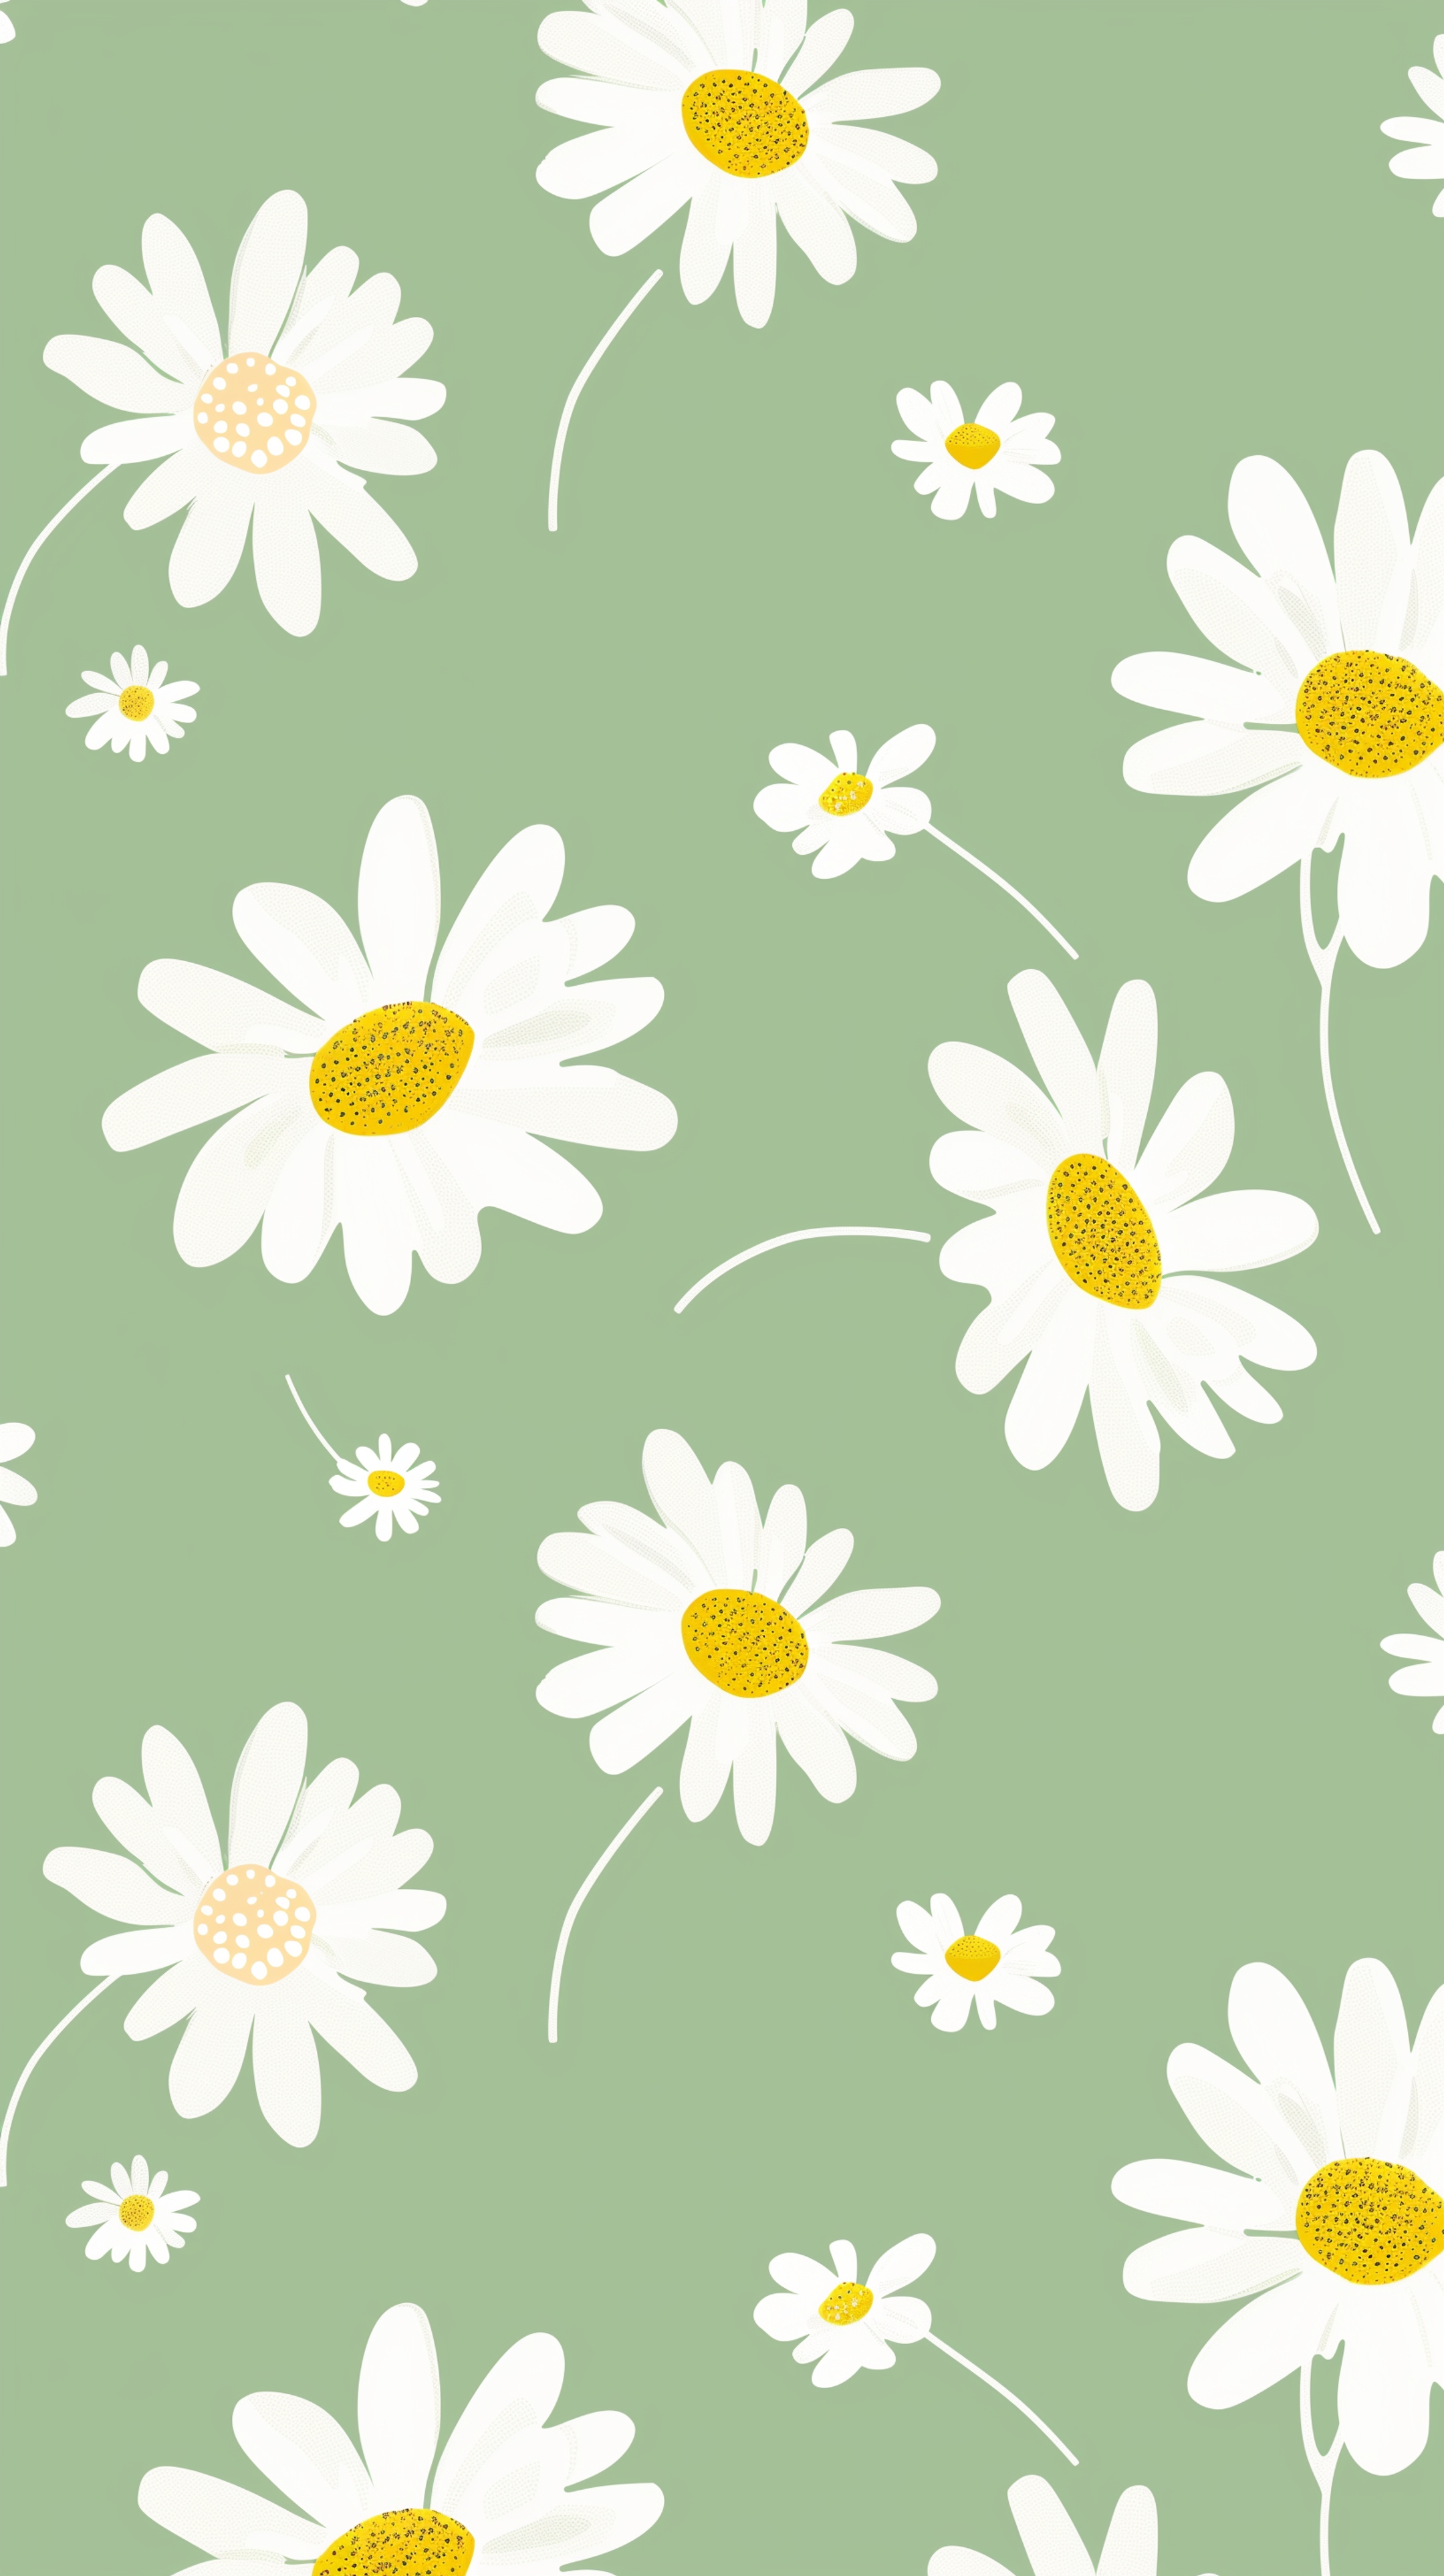 Cheerful Daisy Pattern for Kids Ფონი[cc2a0d8b223a410ca032]